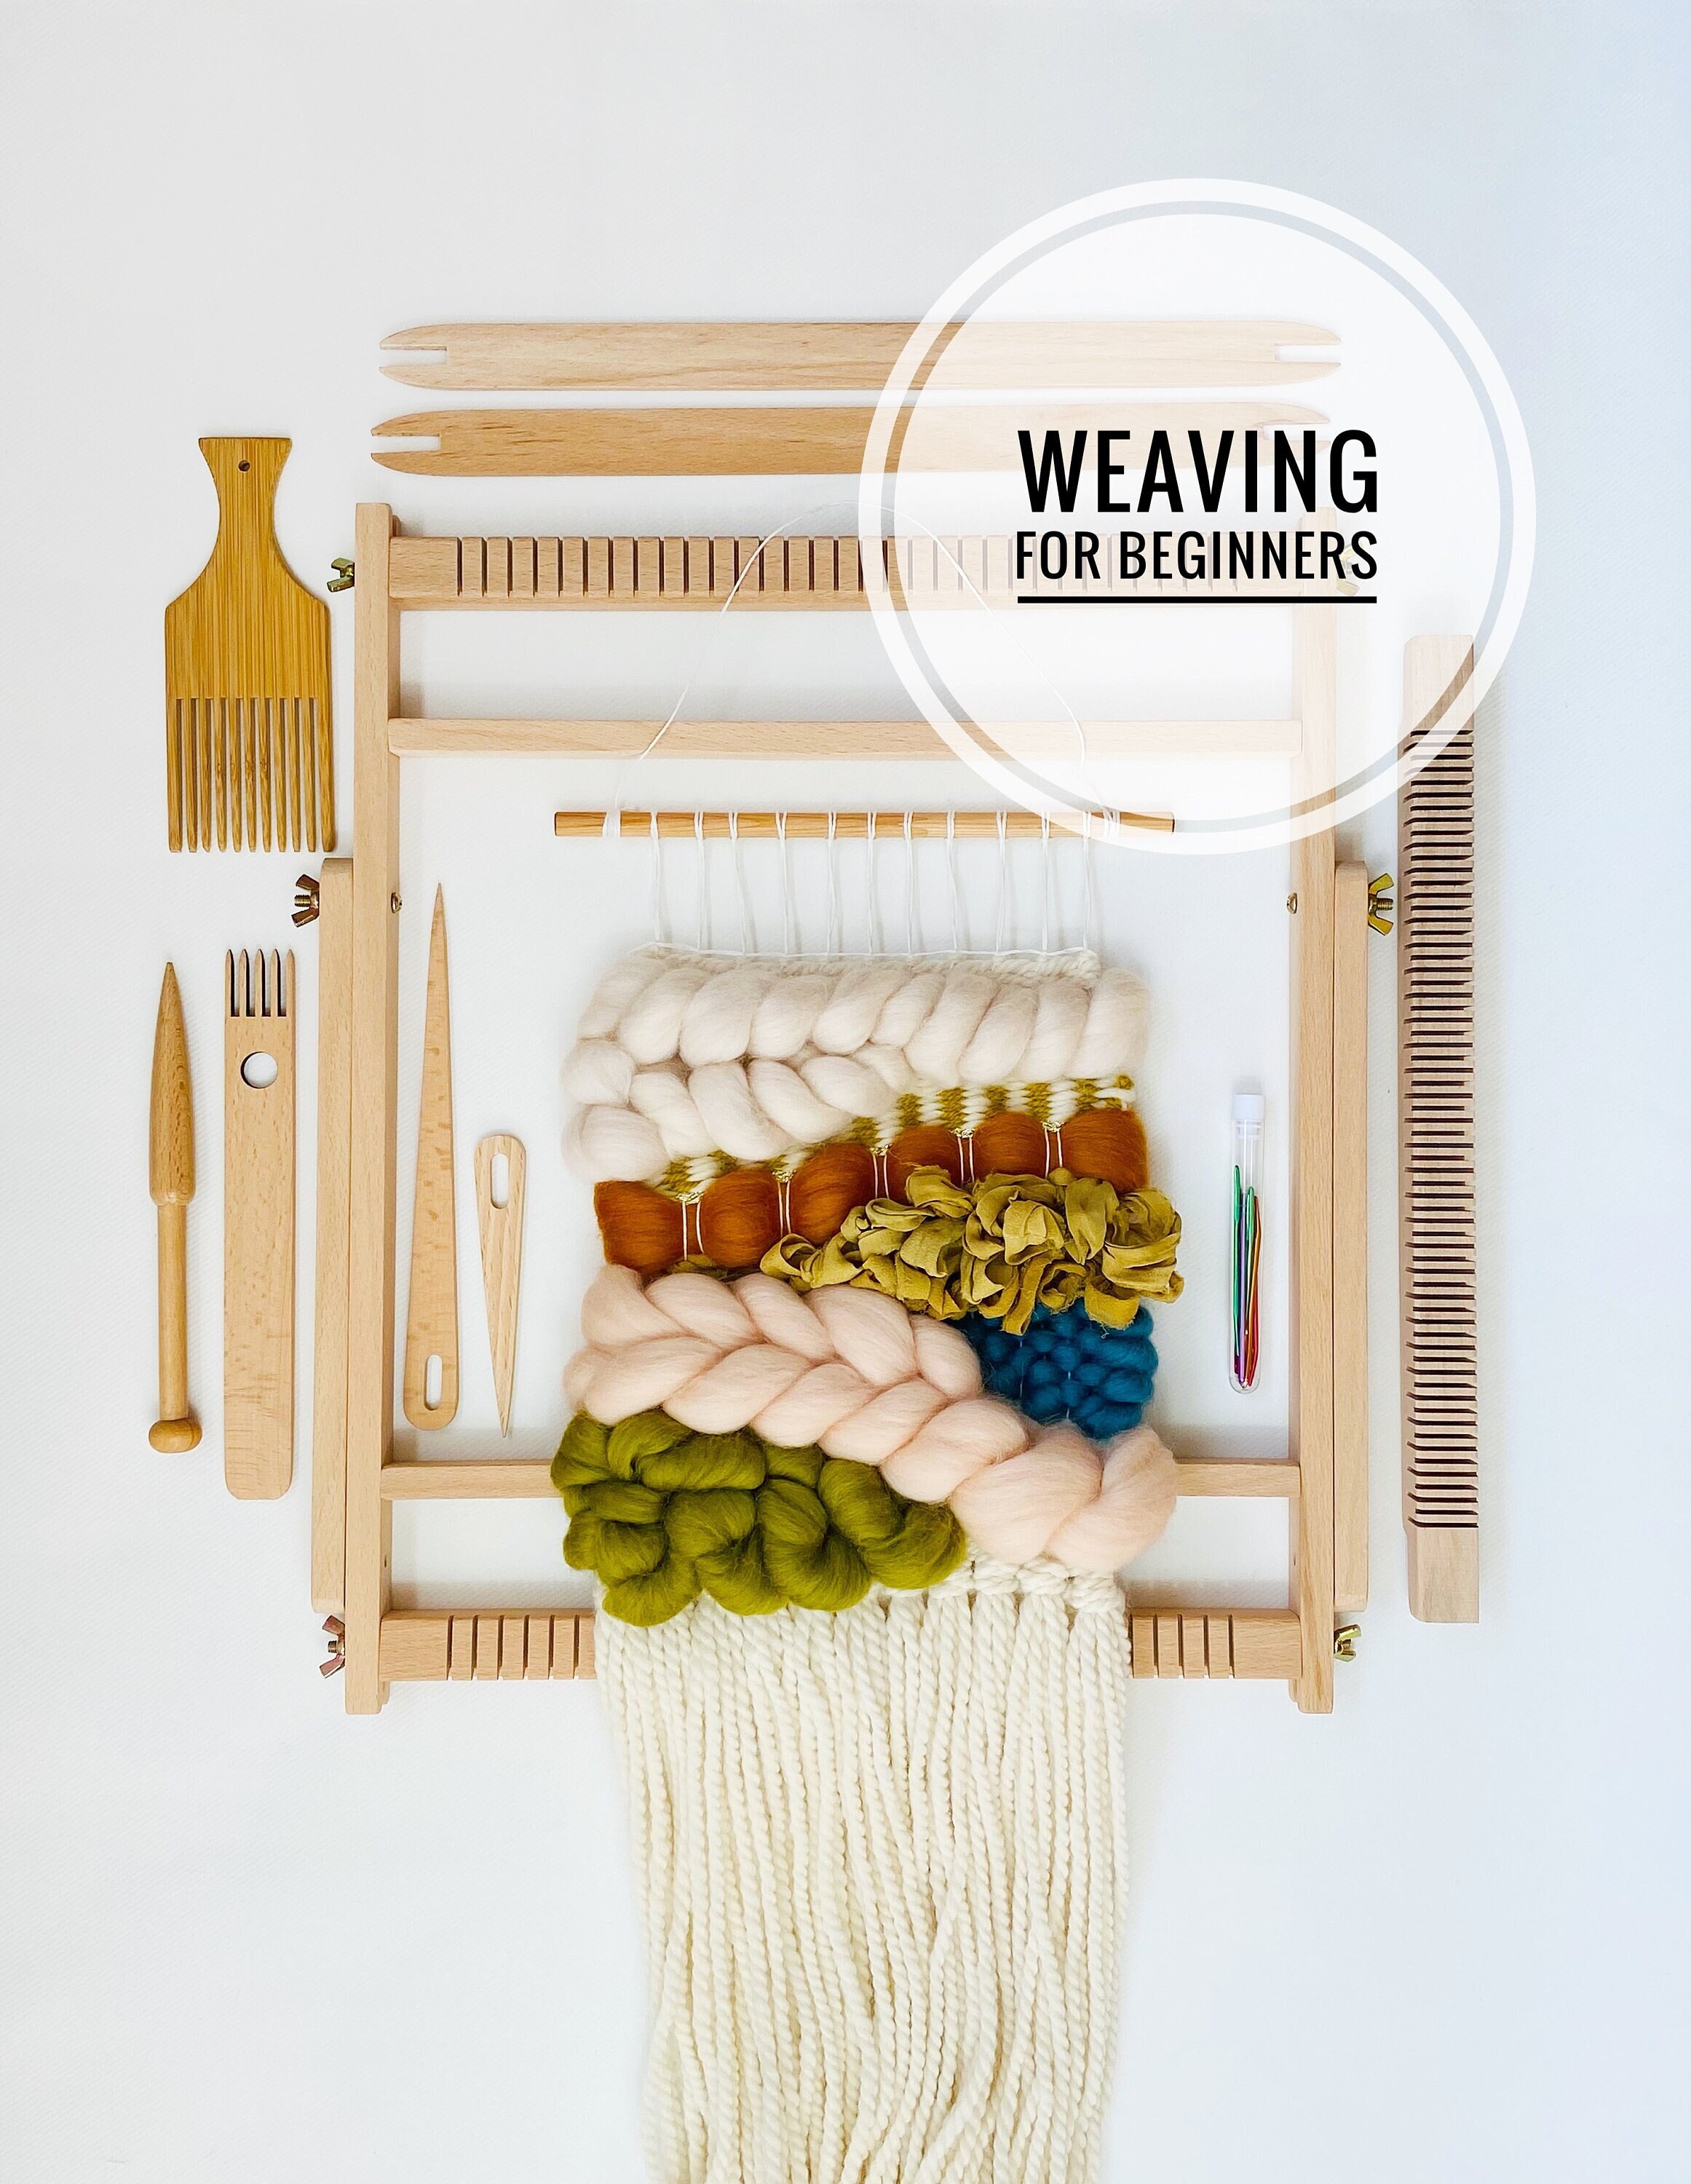 Weaving Loom Kit for Kids/craft Your Own Pot Holders for Ages 6 13 & Older  